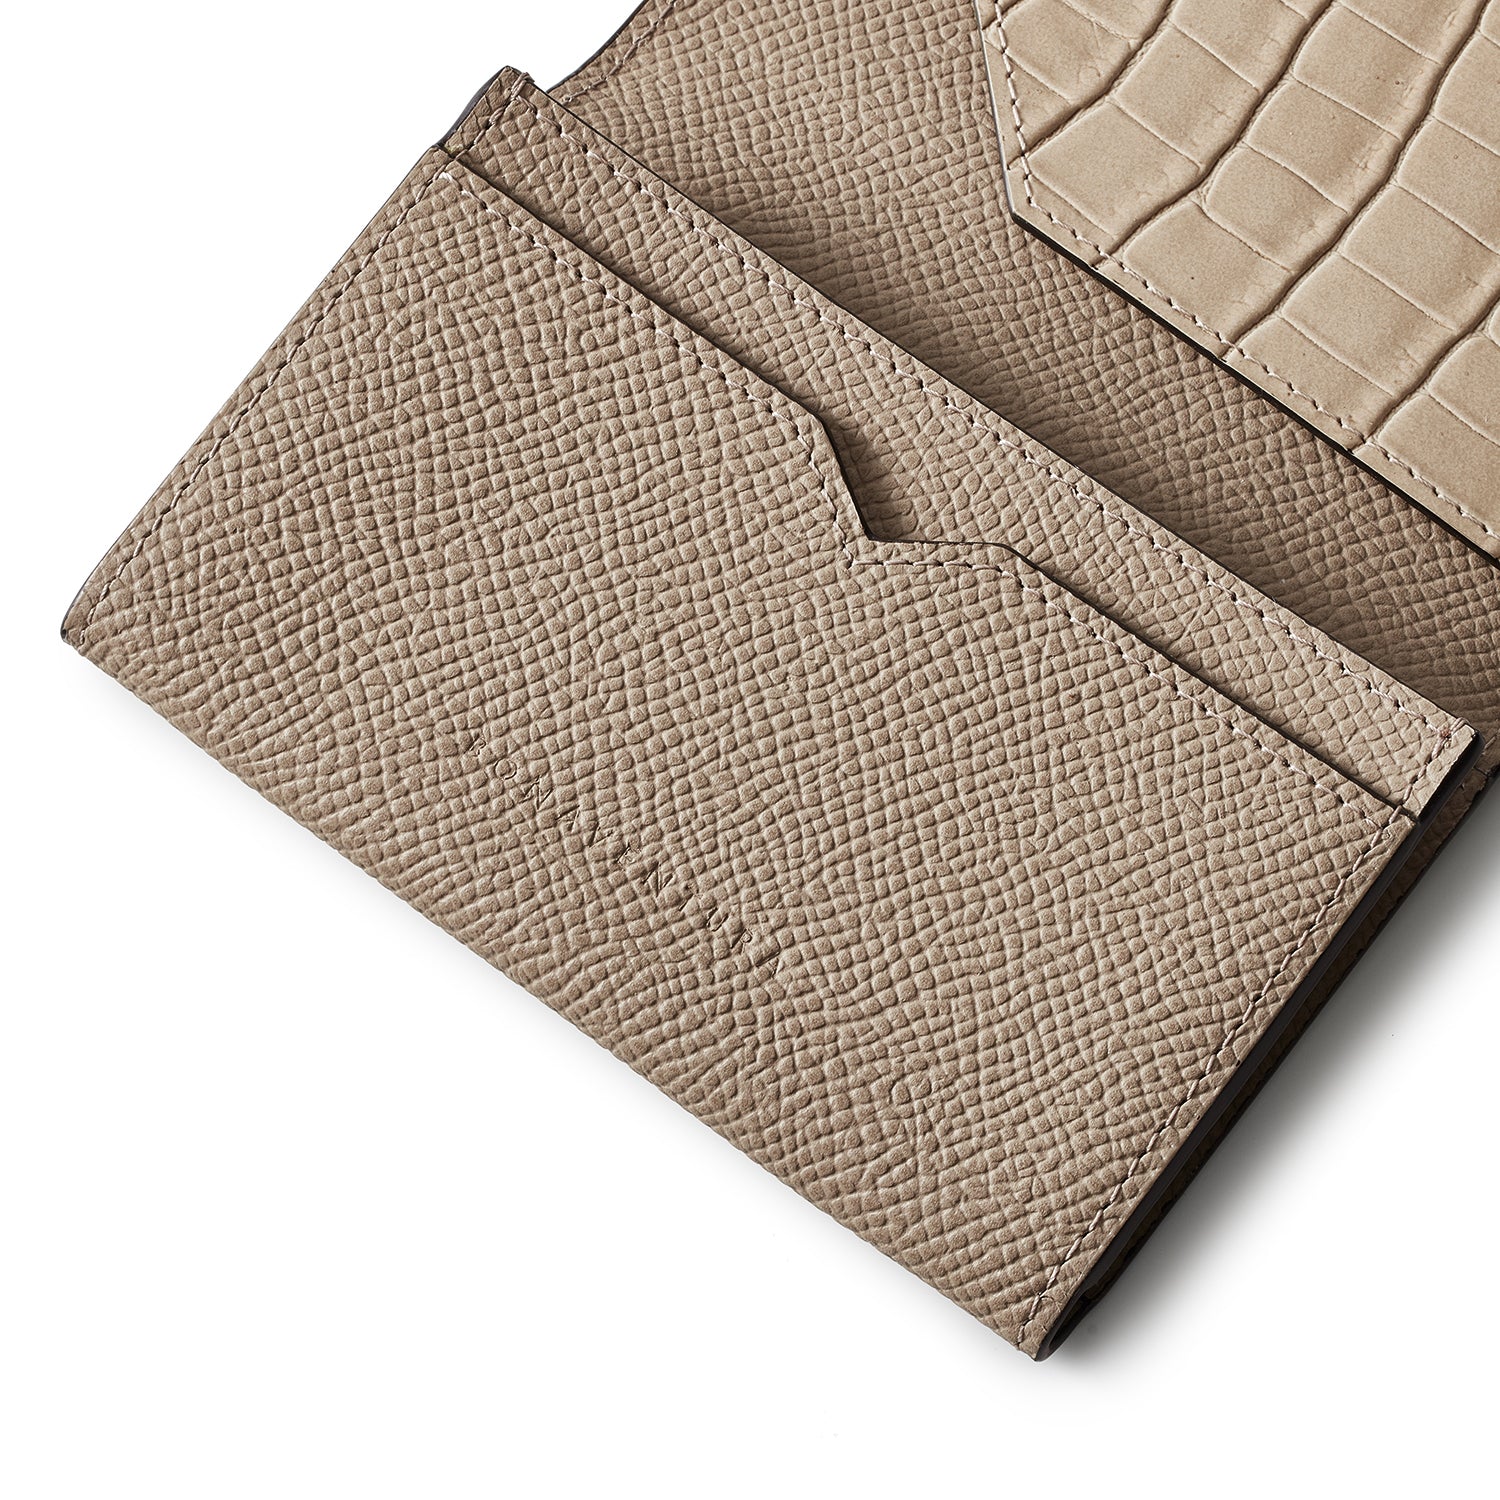 Business card case with sleeve in Noblesse x embossed crocodile leather